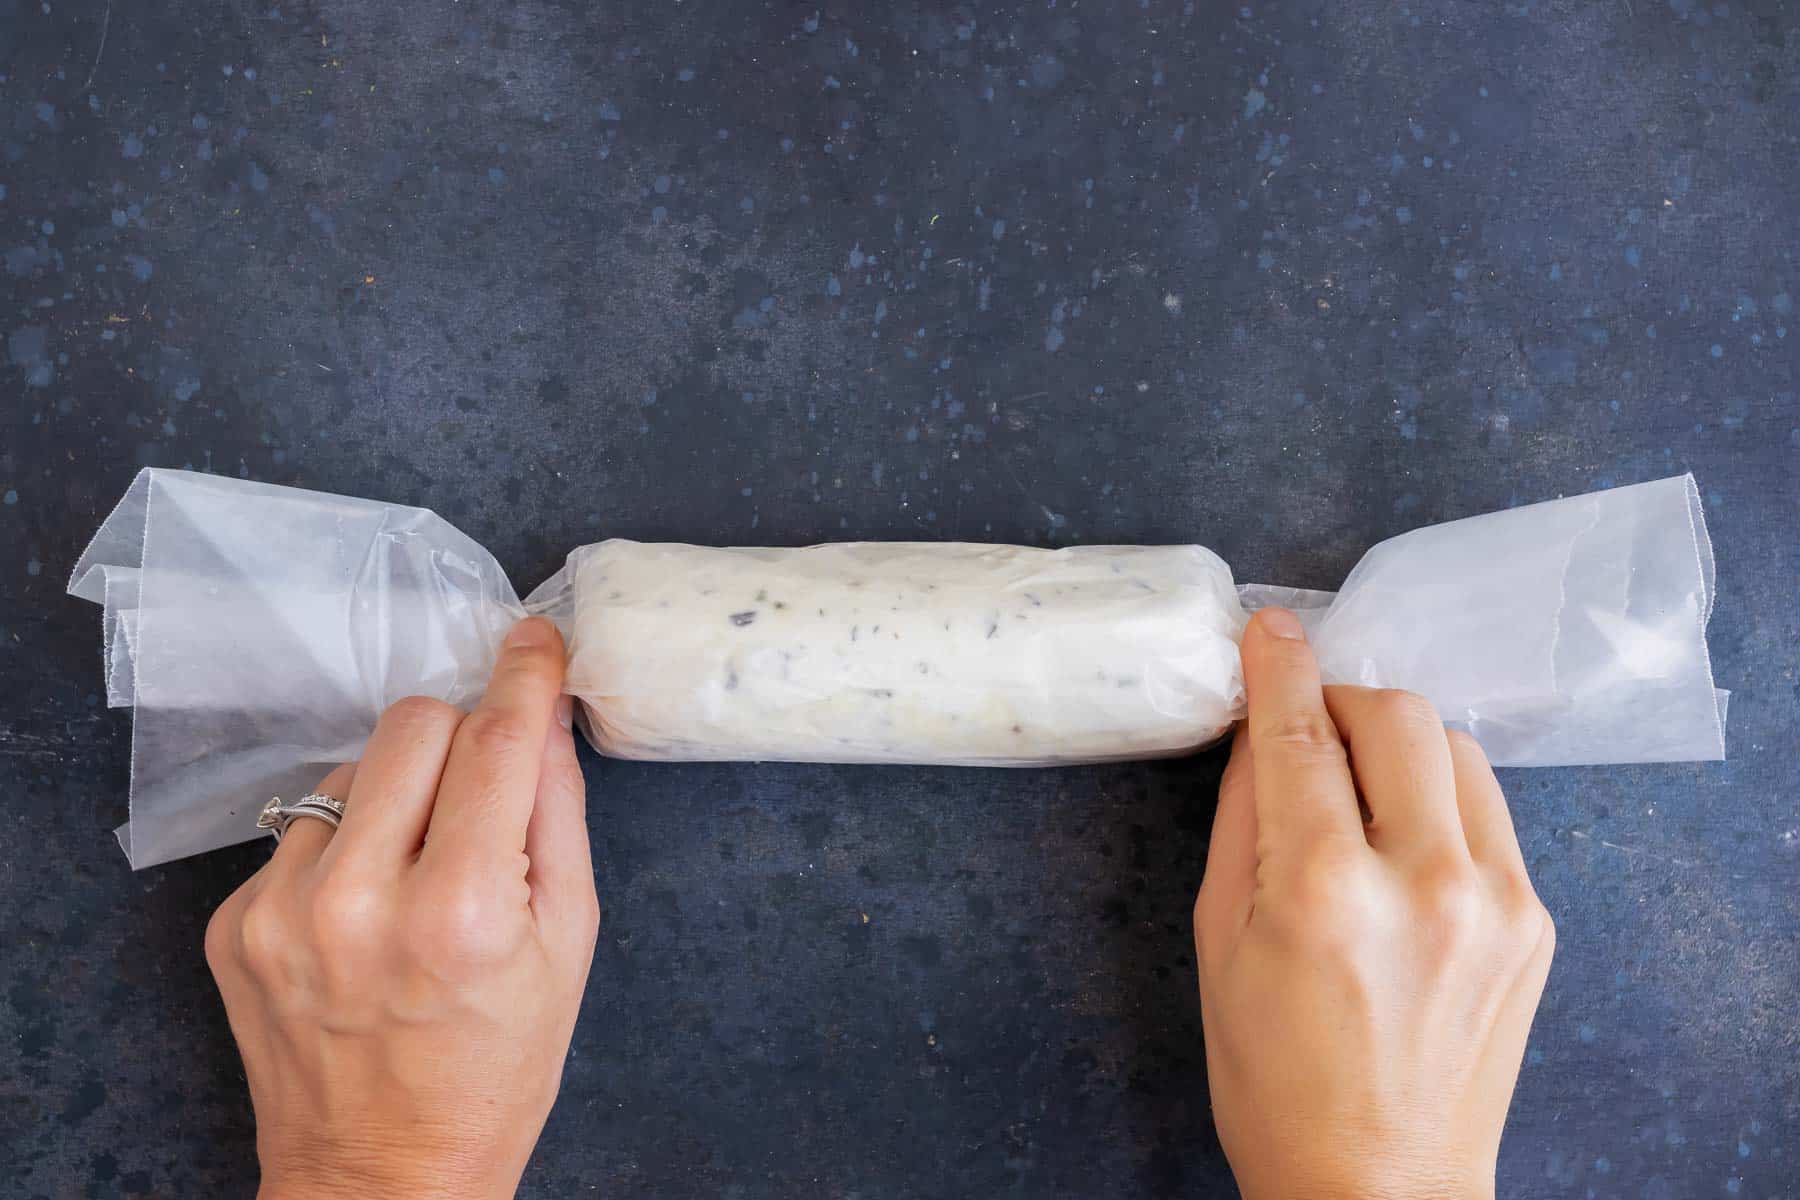 The goat cheese log is wrapped in wax paper.